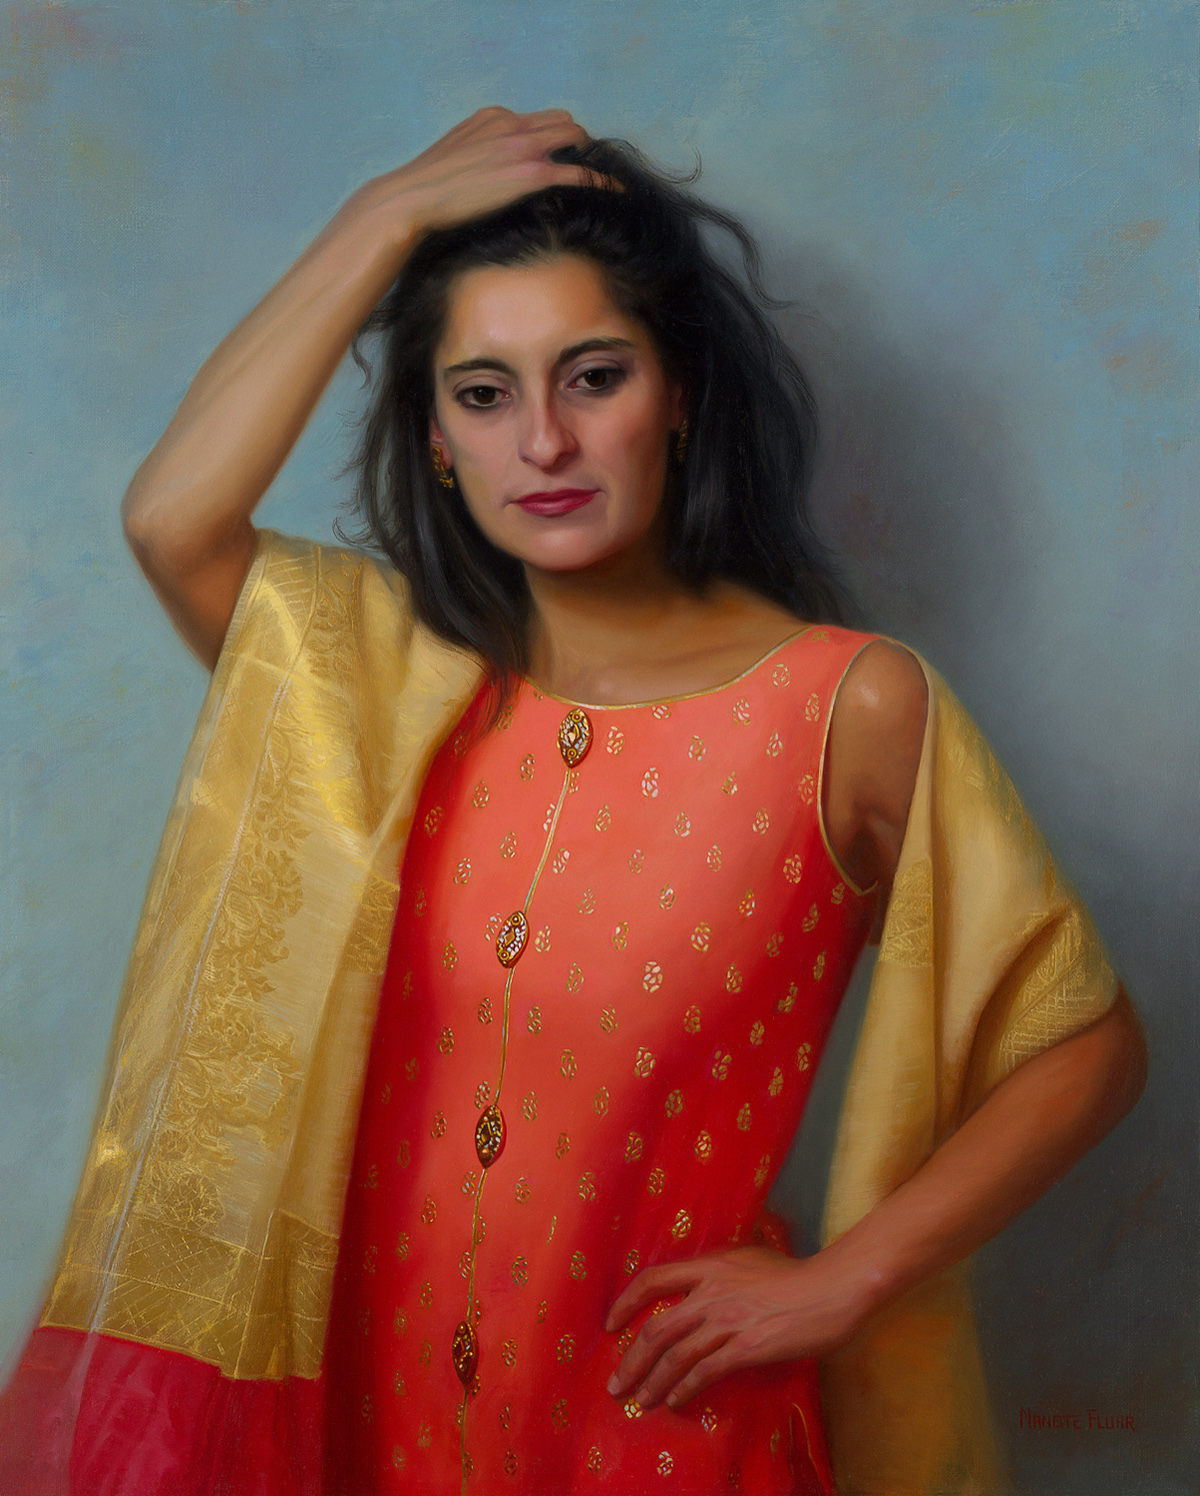 oil painting of woman wearing orange-red dress with a yellow drapery, hanging off her shoulders